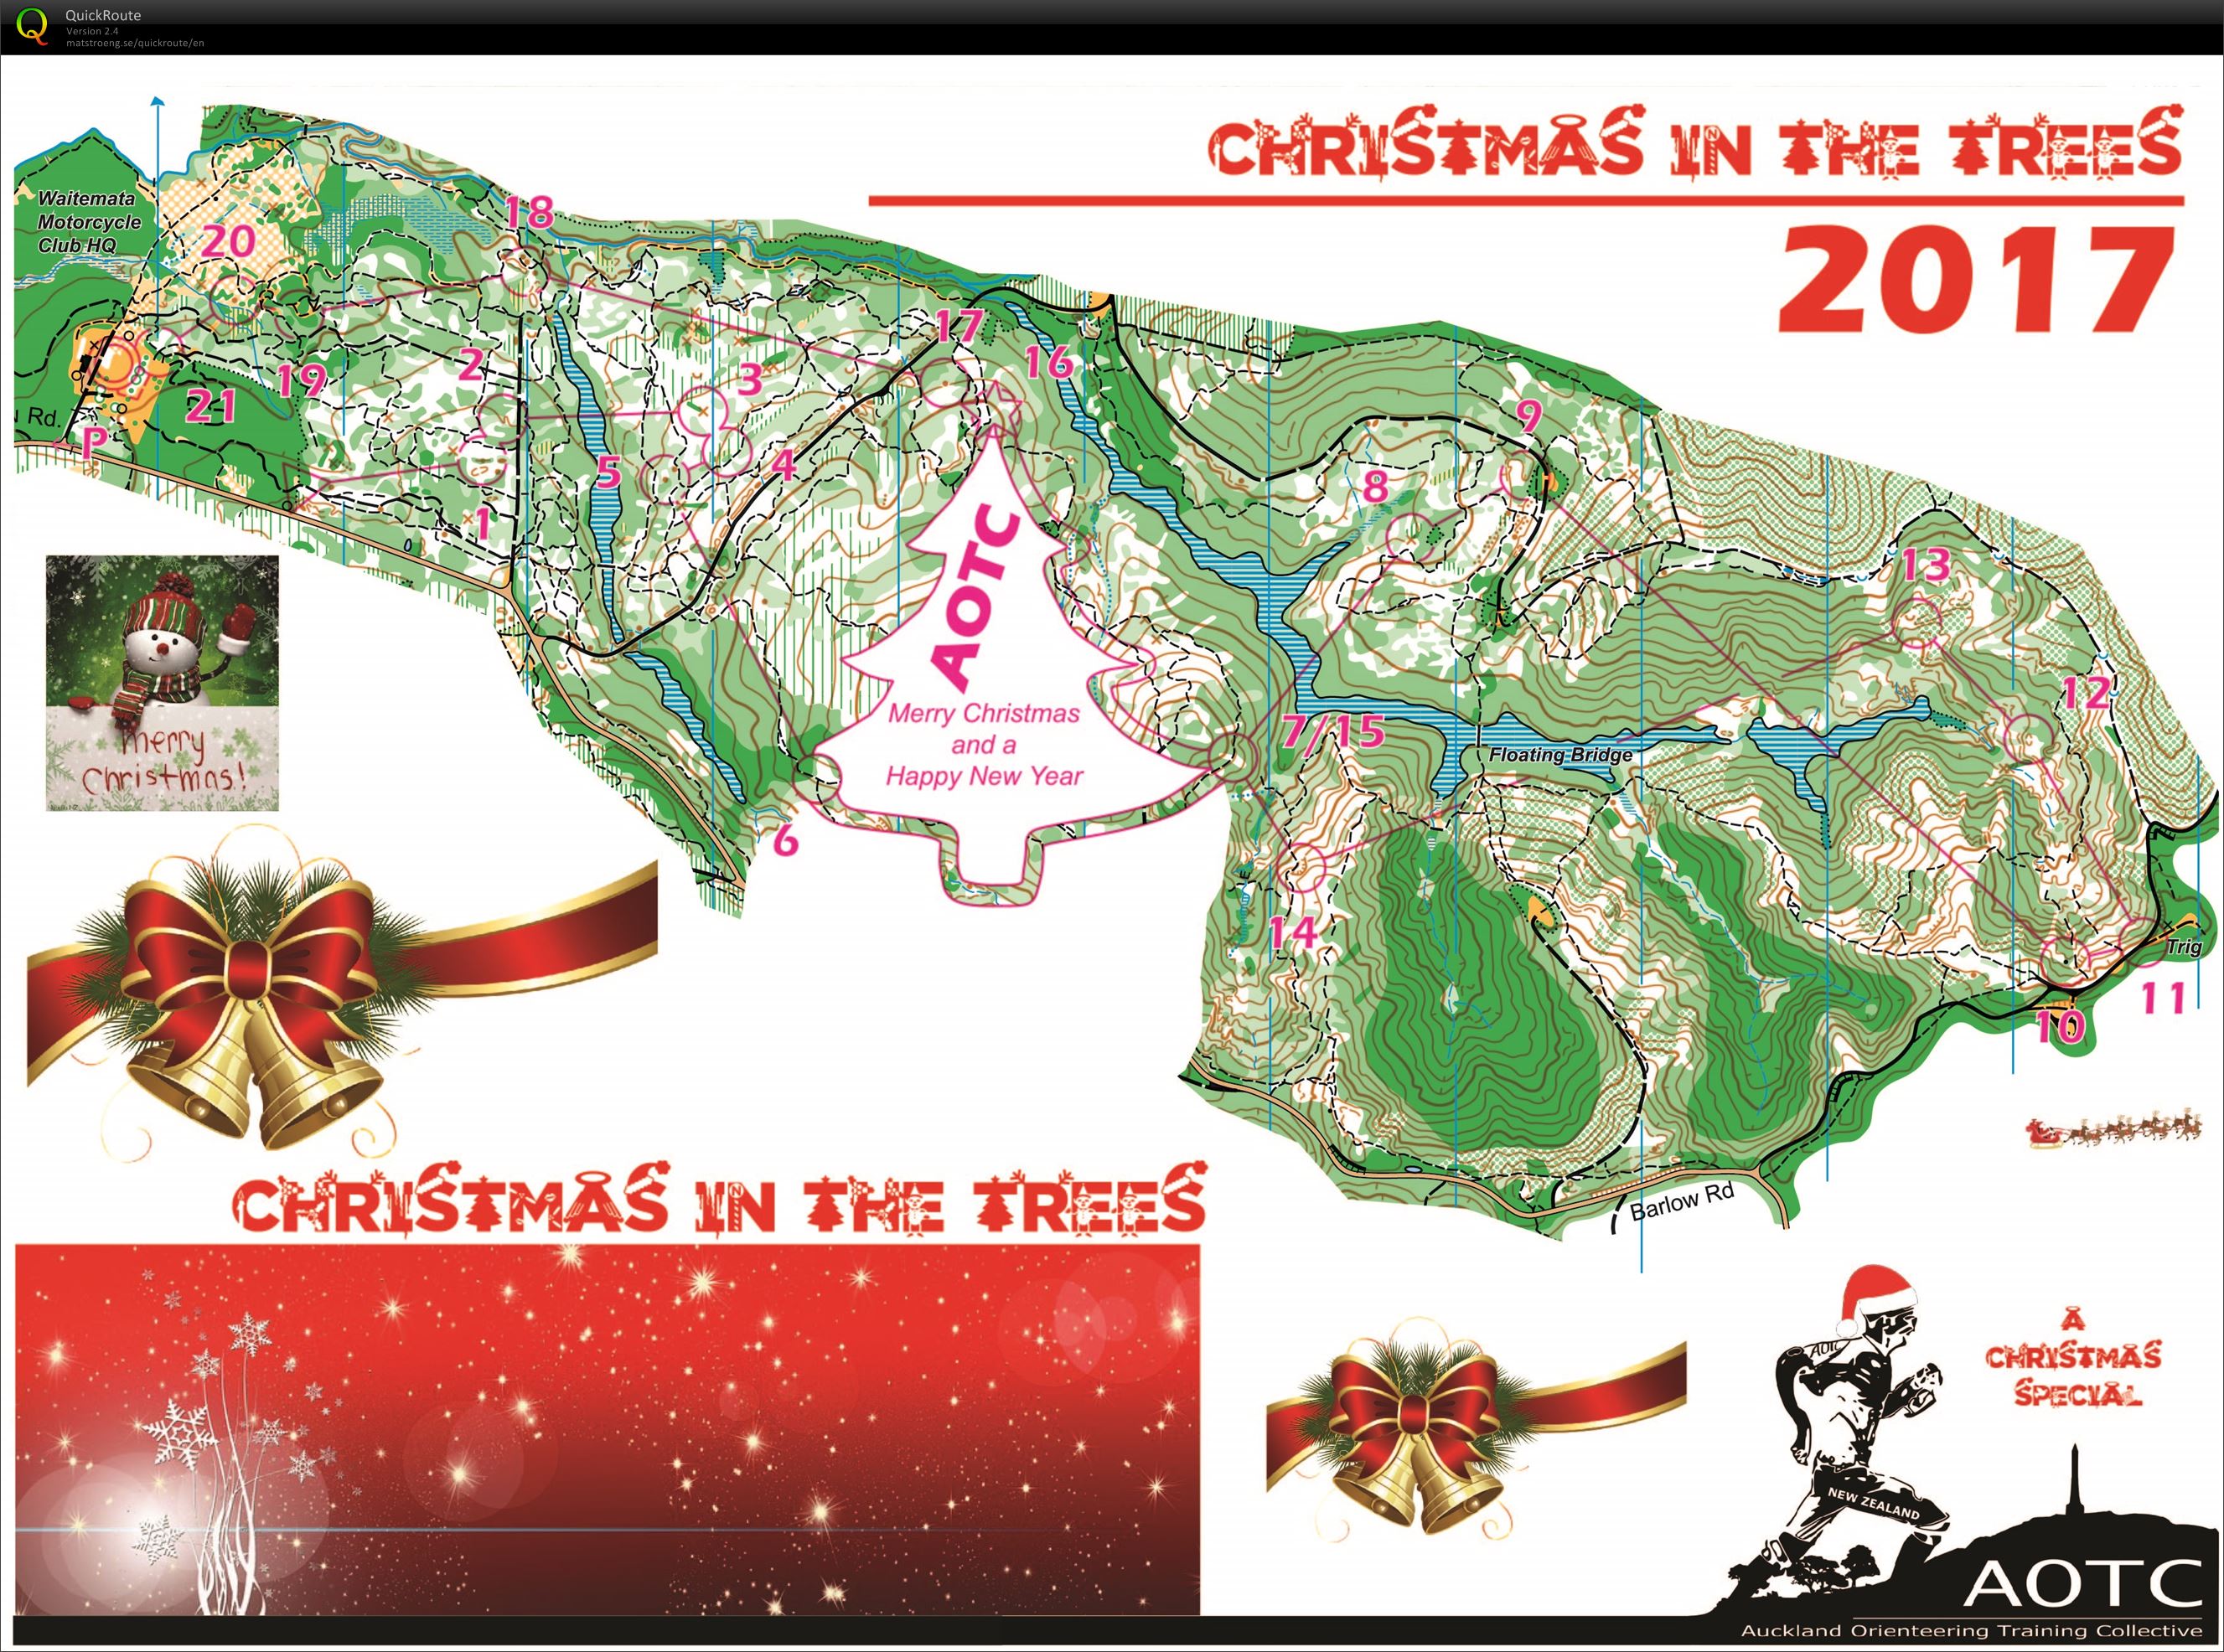 Christmas in the Trees 2017 (16/12/2017)